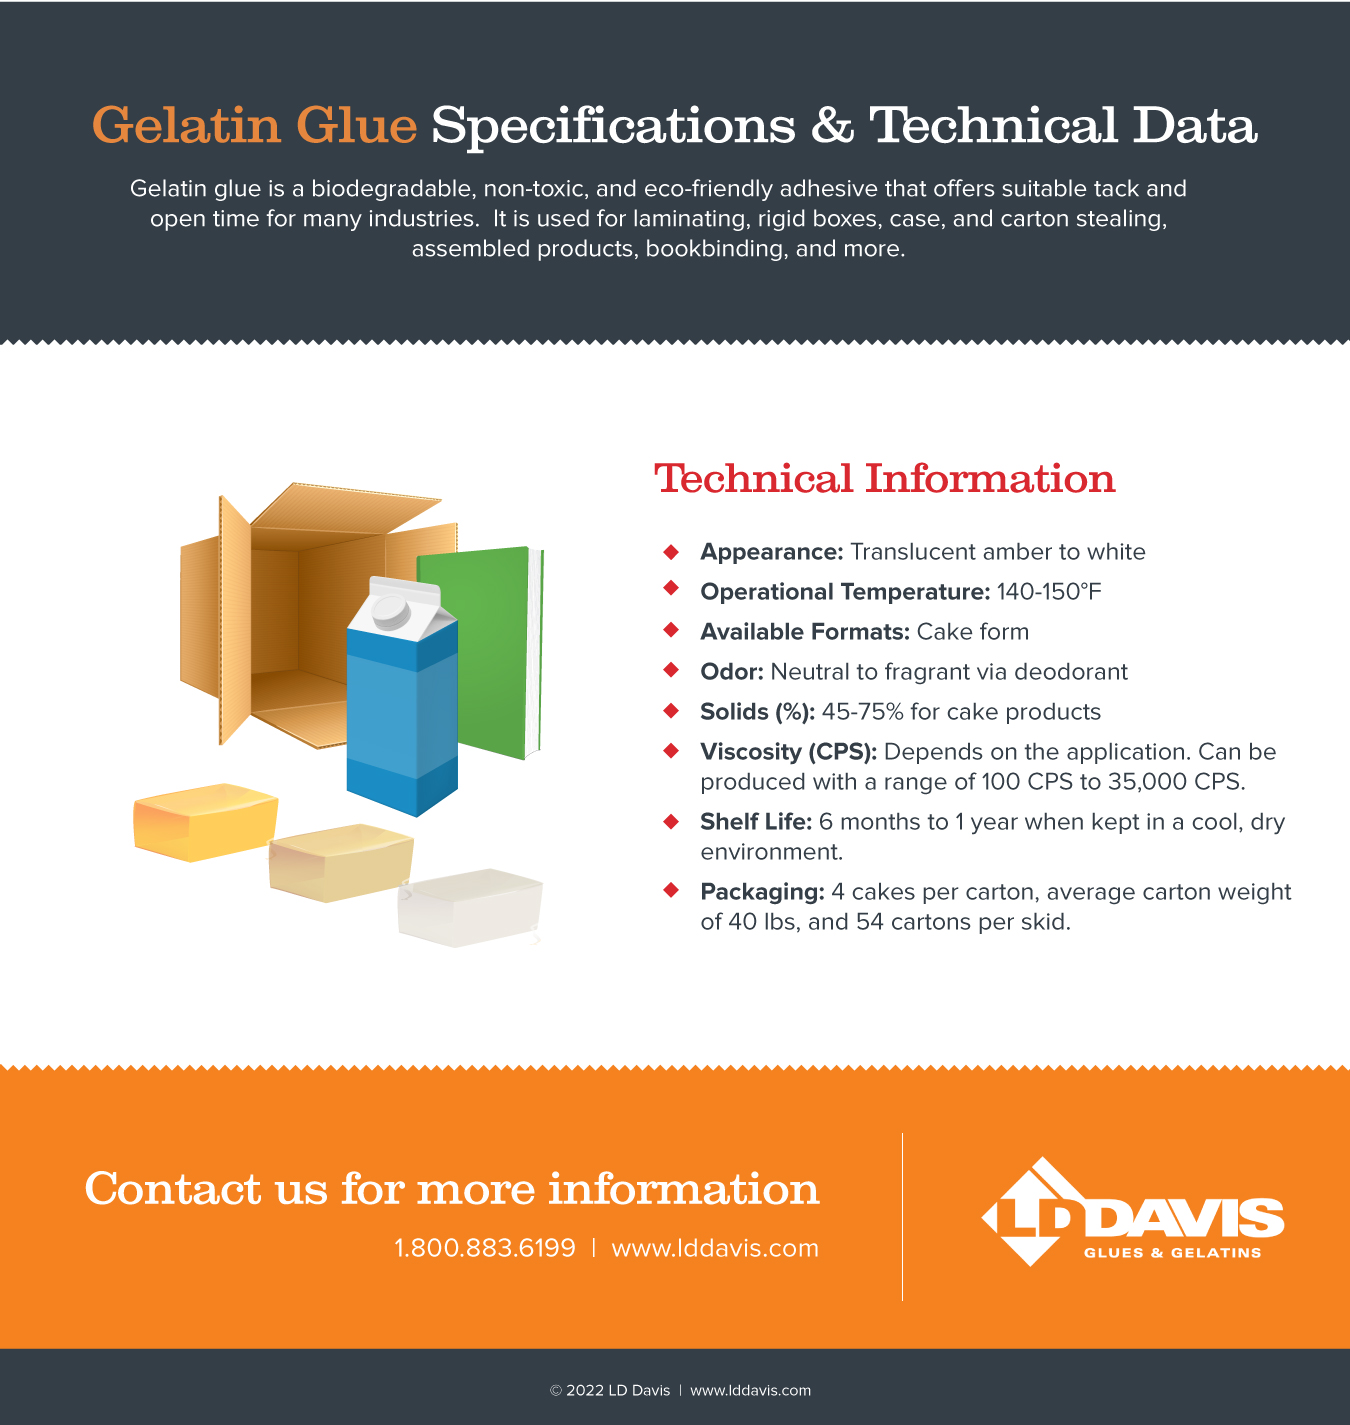 Infographic showing technical information for gelatin glue